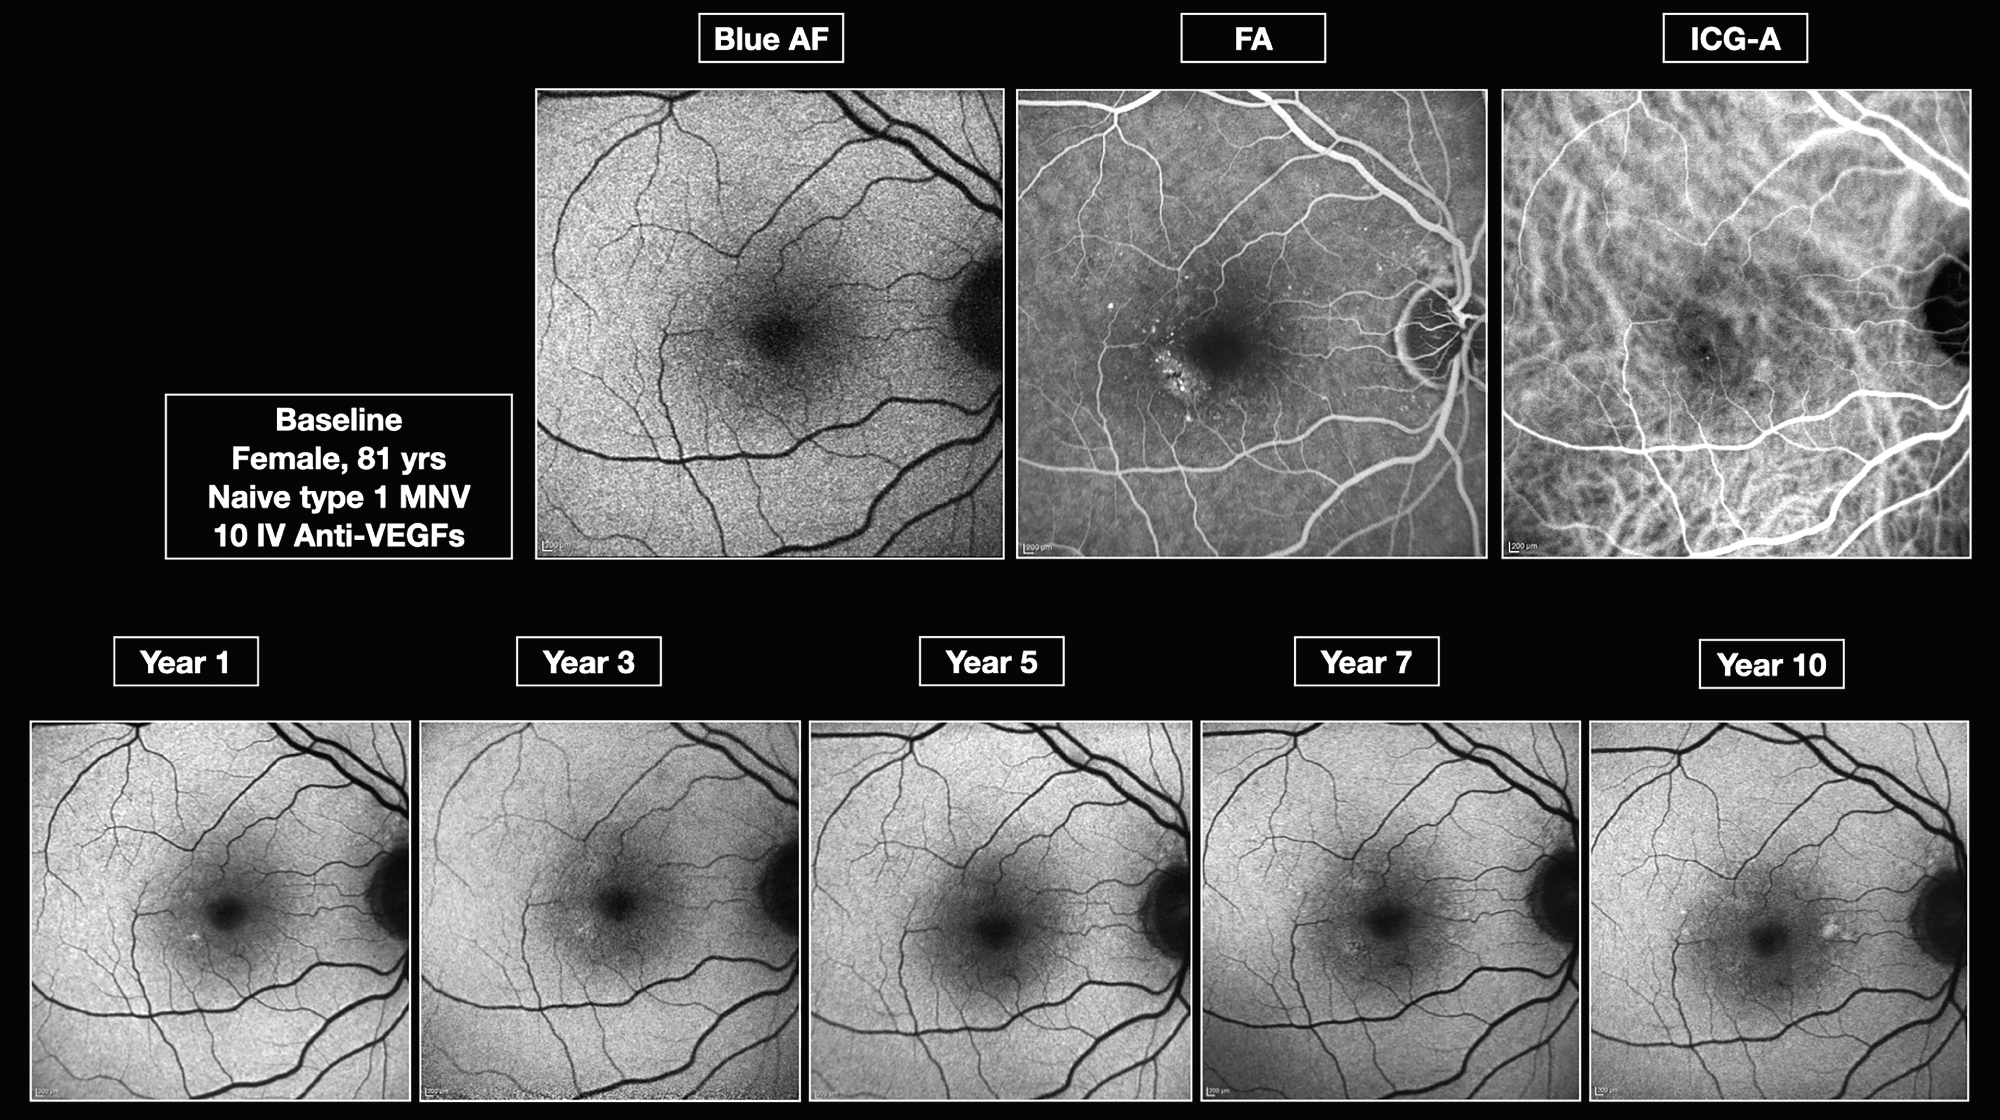 Figure 2. Type 1 choroidal neovascularization without geographic atrophy development over a 10-year period.